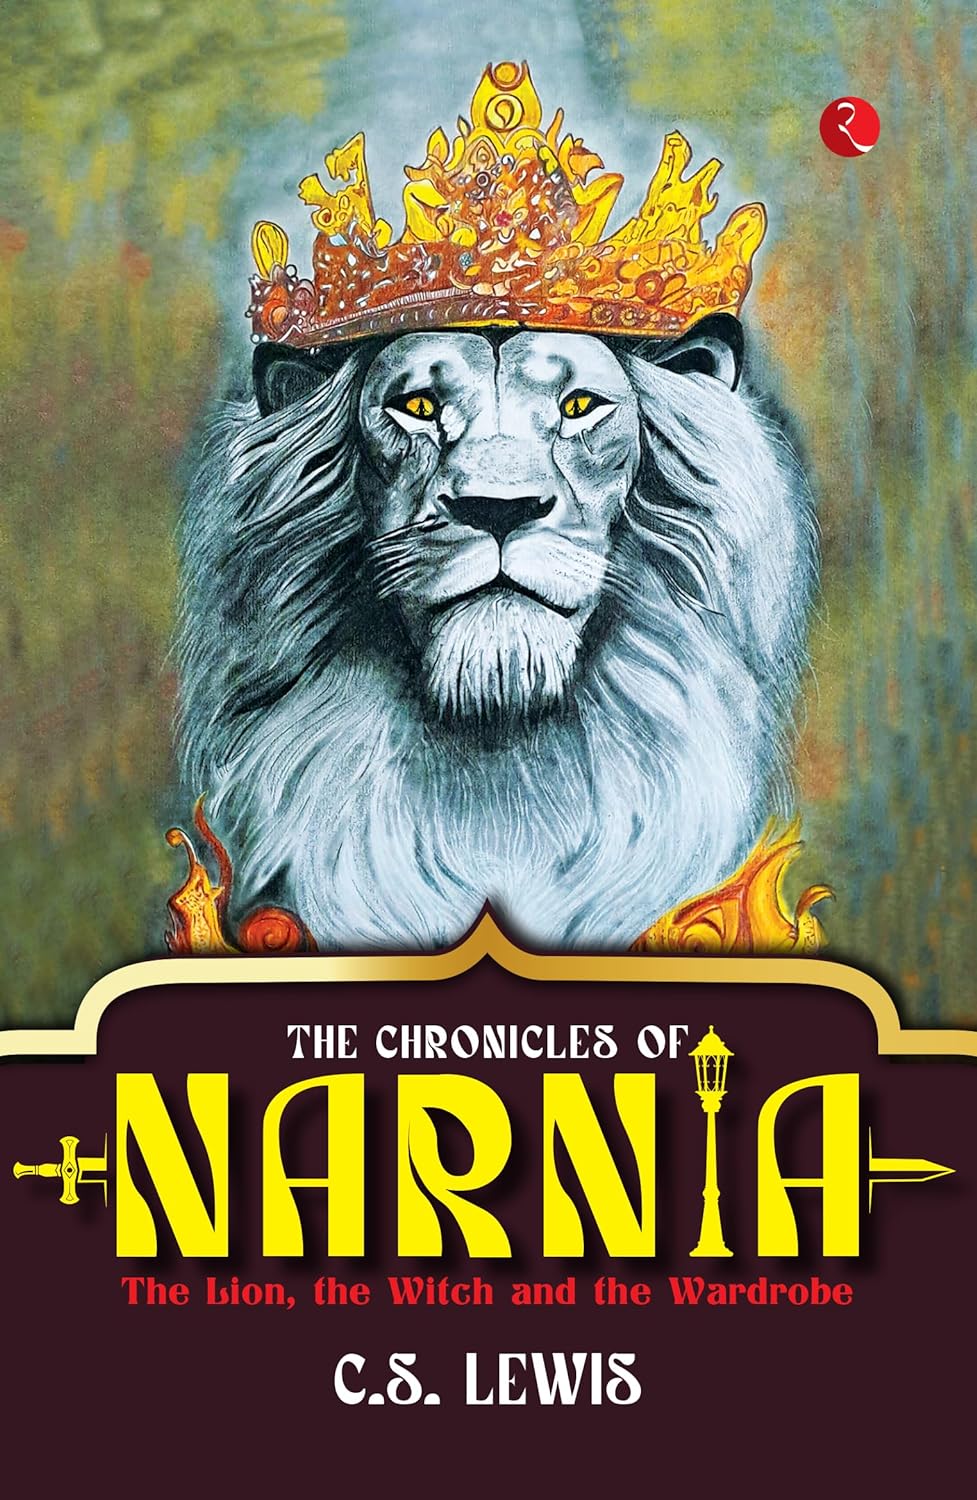 The Chronicles Of Narnia: Theion, The Witch And The Wardrobe